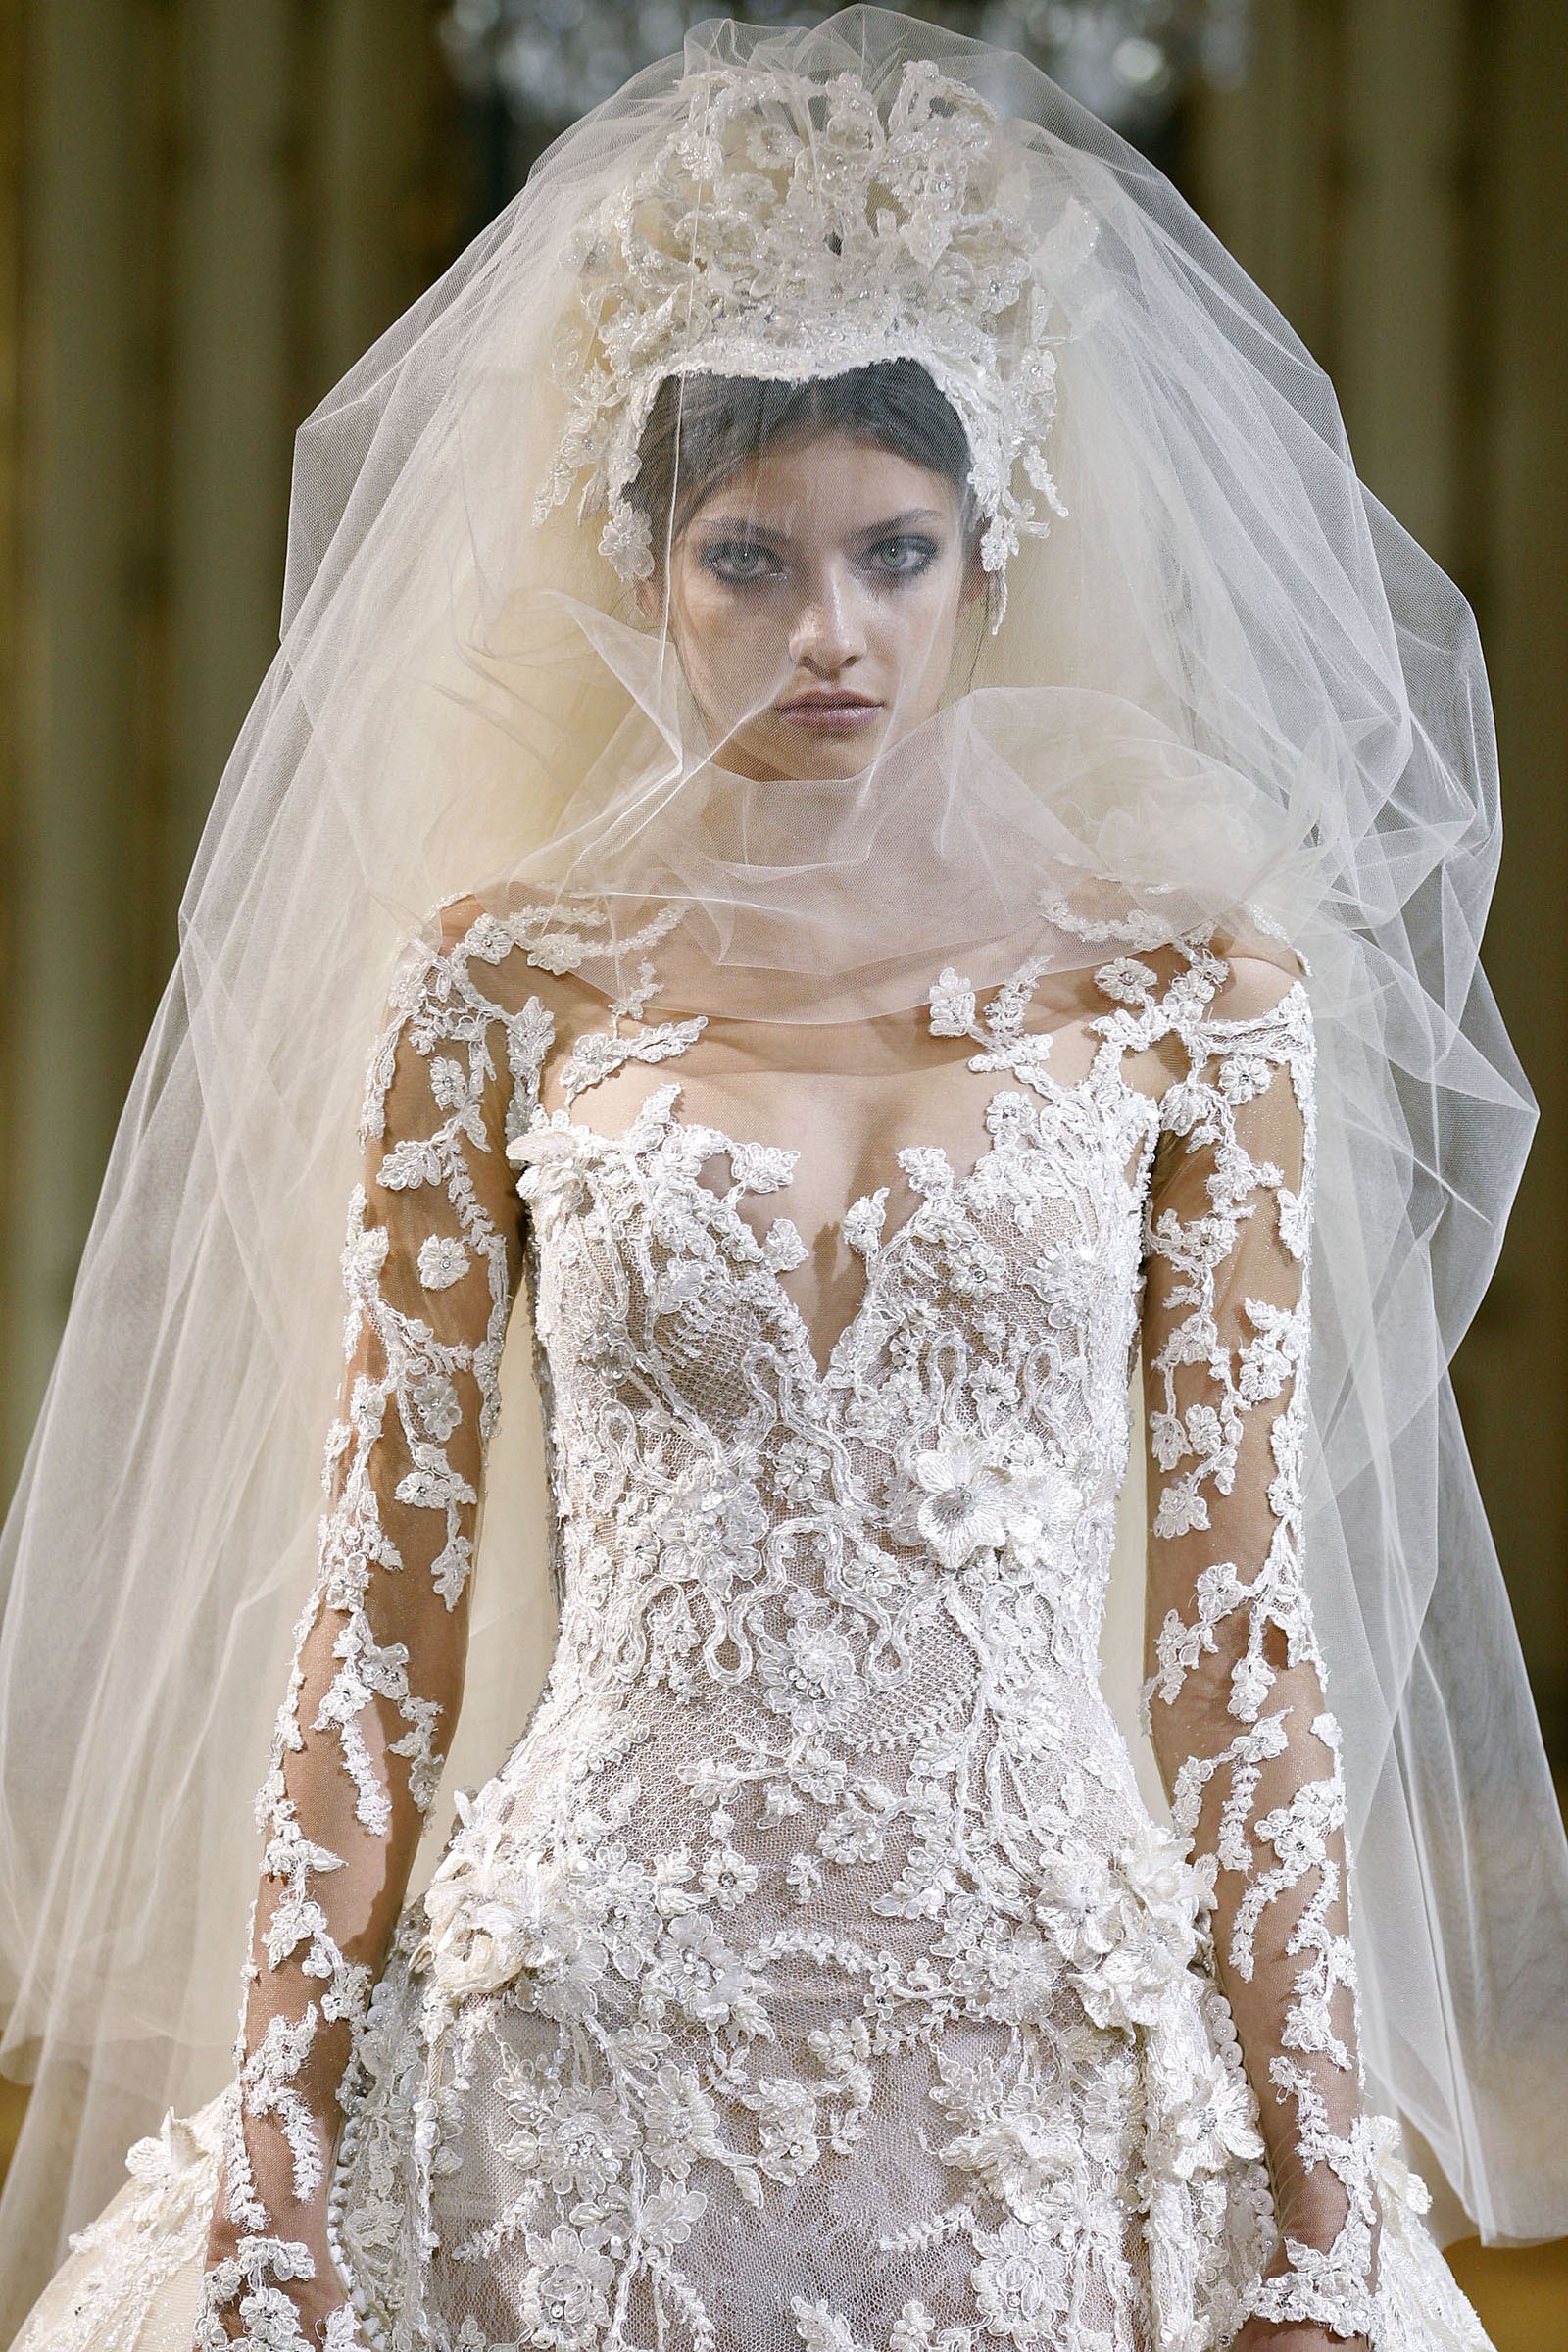 Zuhair Murad Official pictures, F/W 2013-2014 - Couture